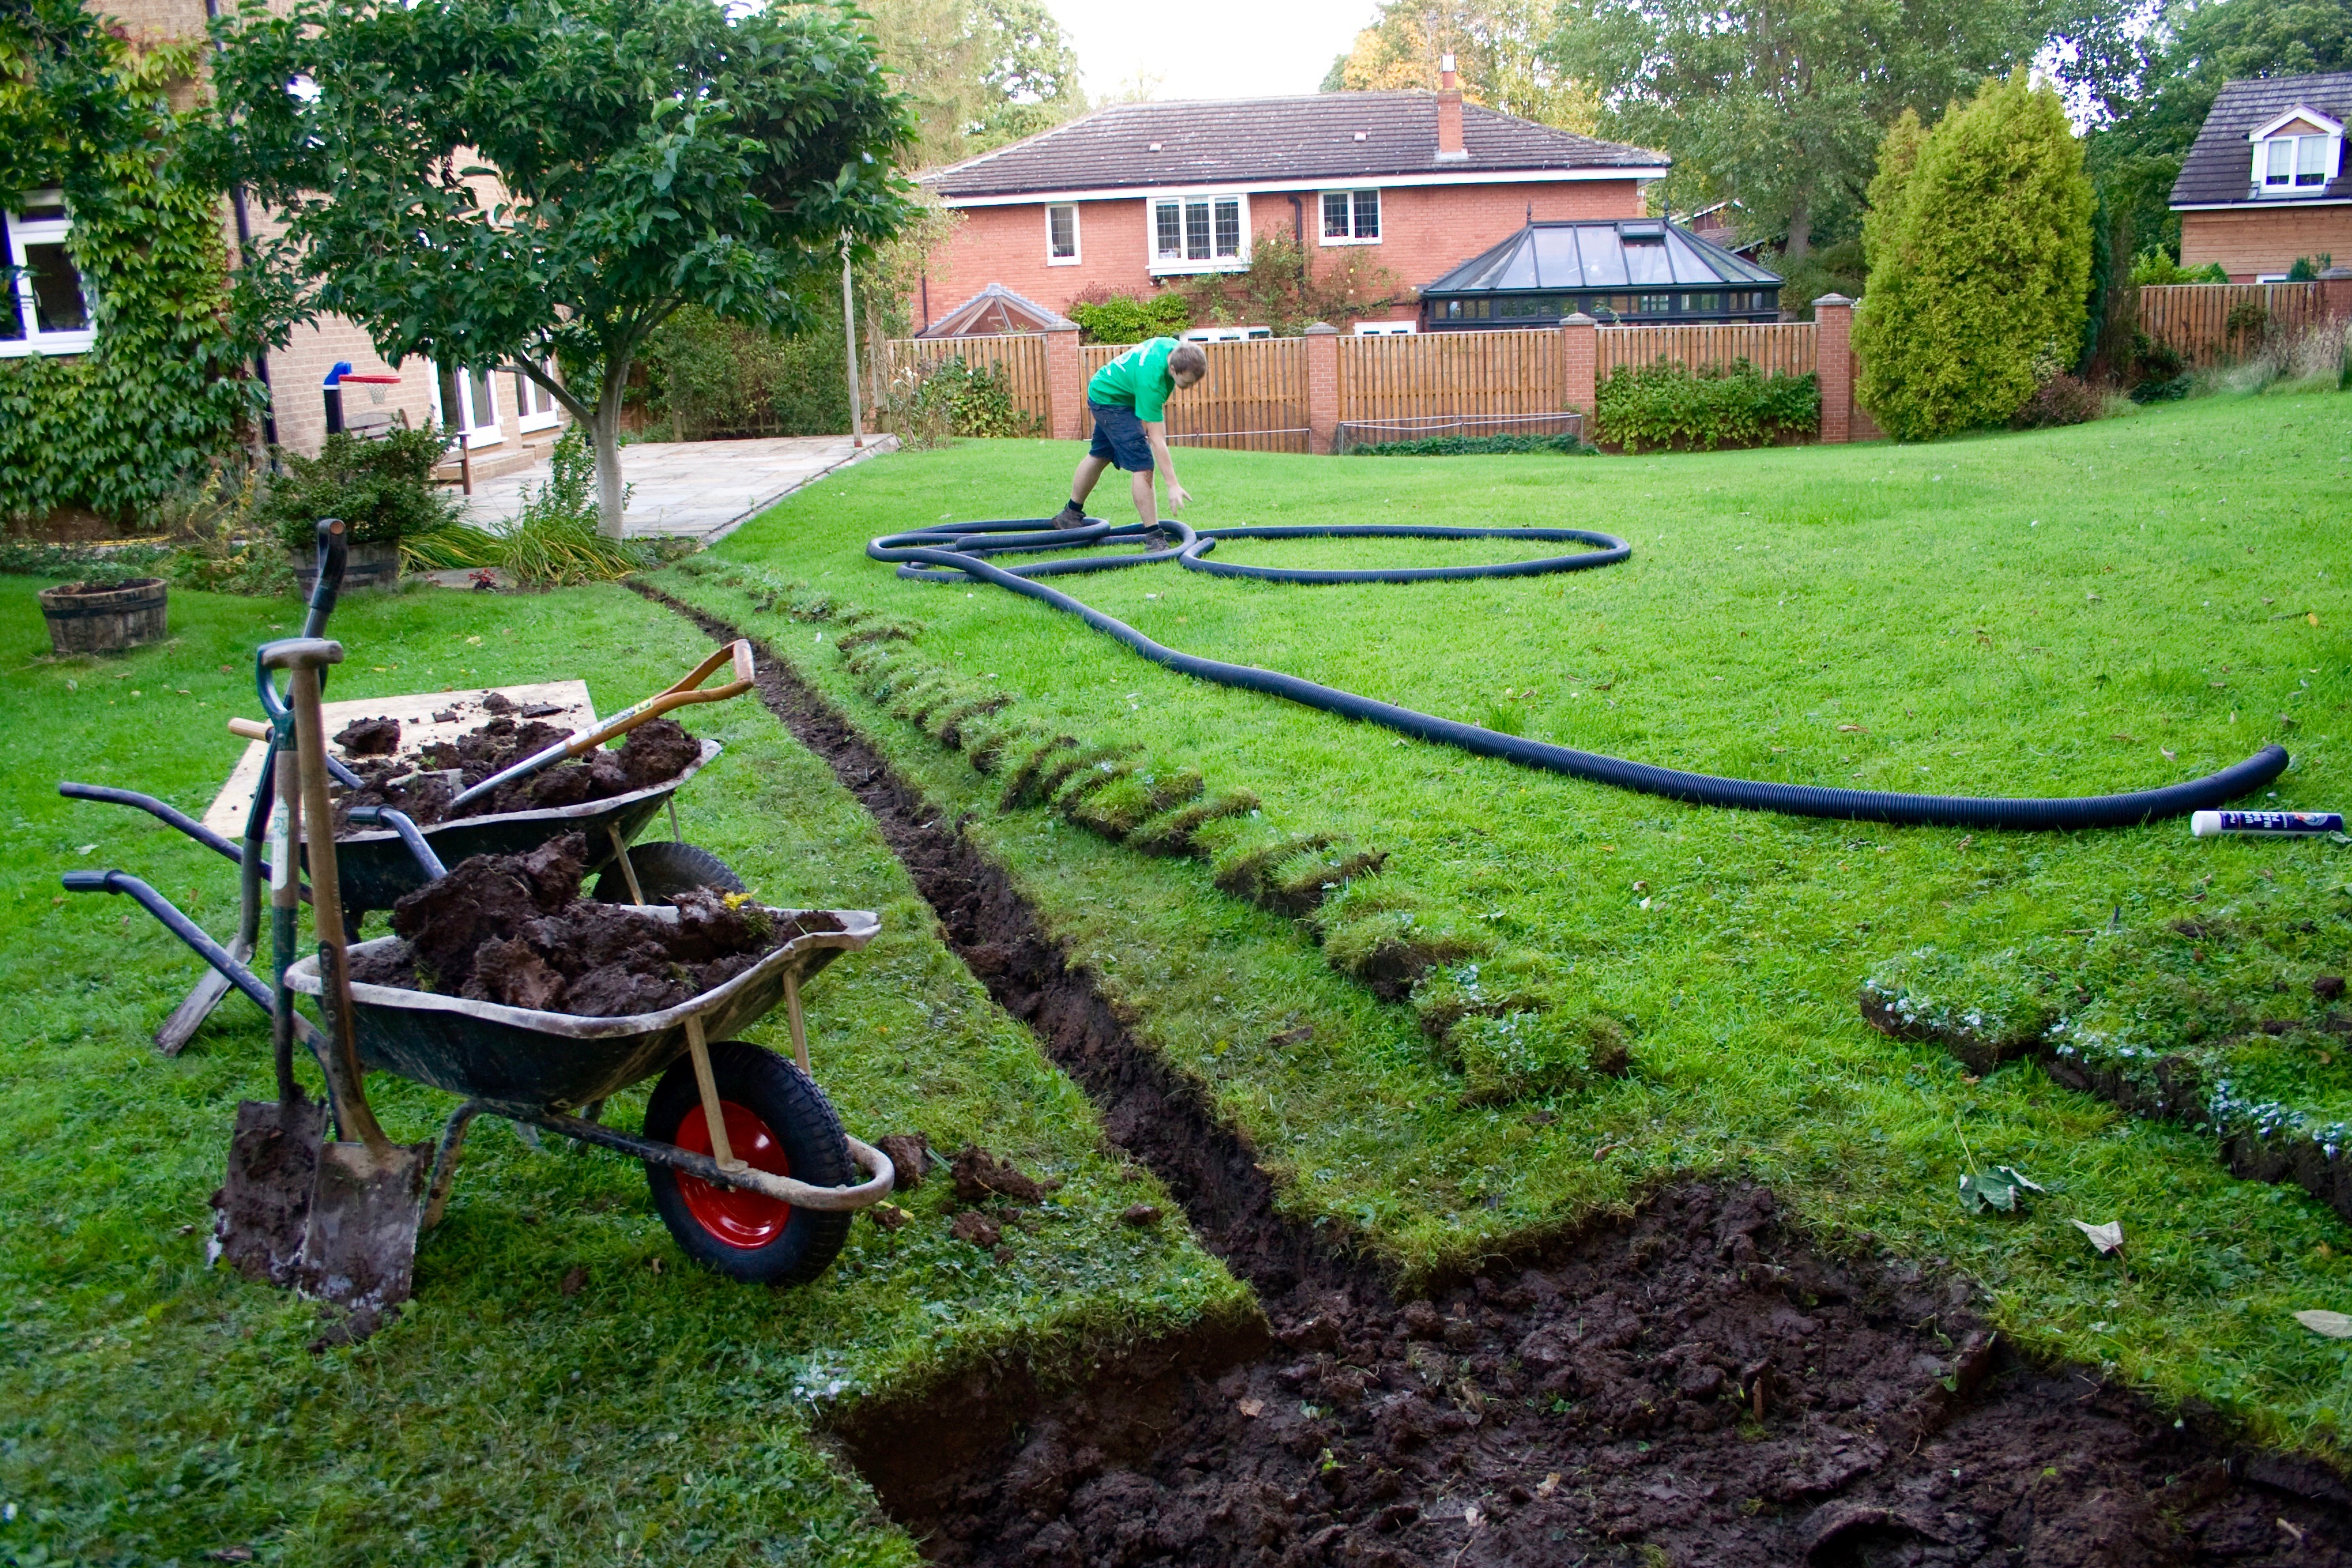 Garden-Drainage-Solutions-Professional-Installers-French-Drainage-System-Herringbone-Drainage-Green-Onion-Landscaping